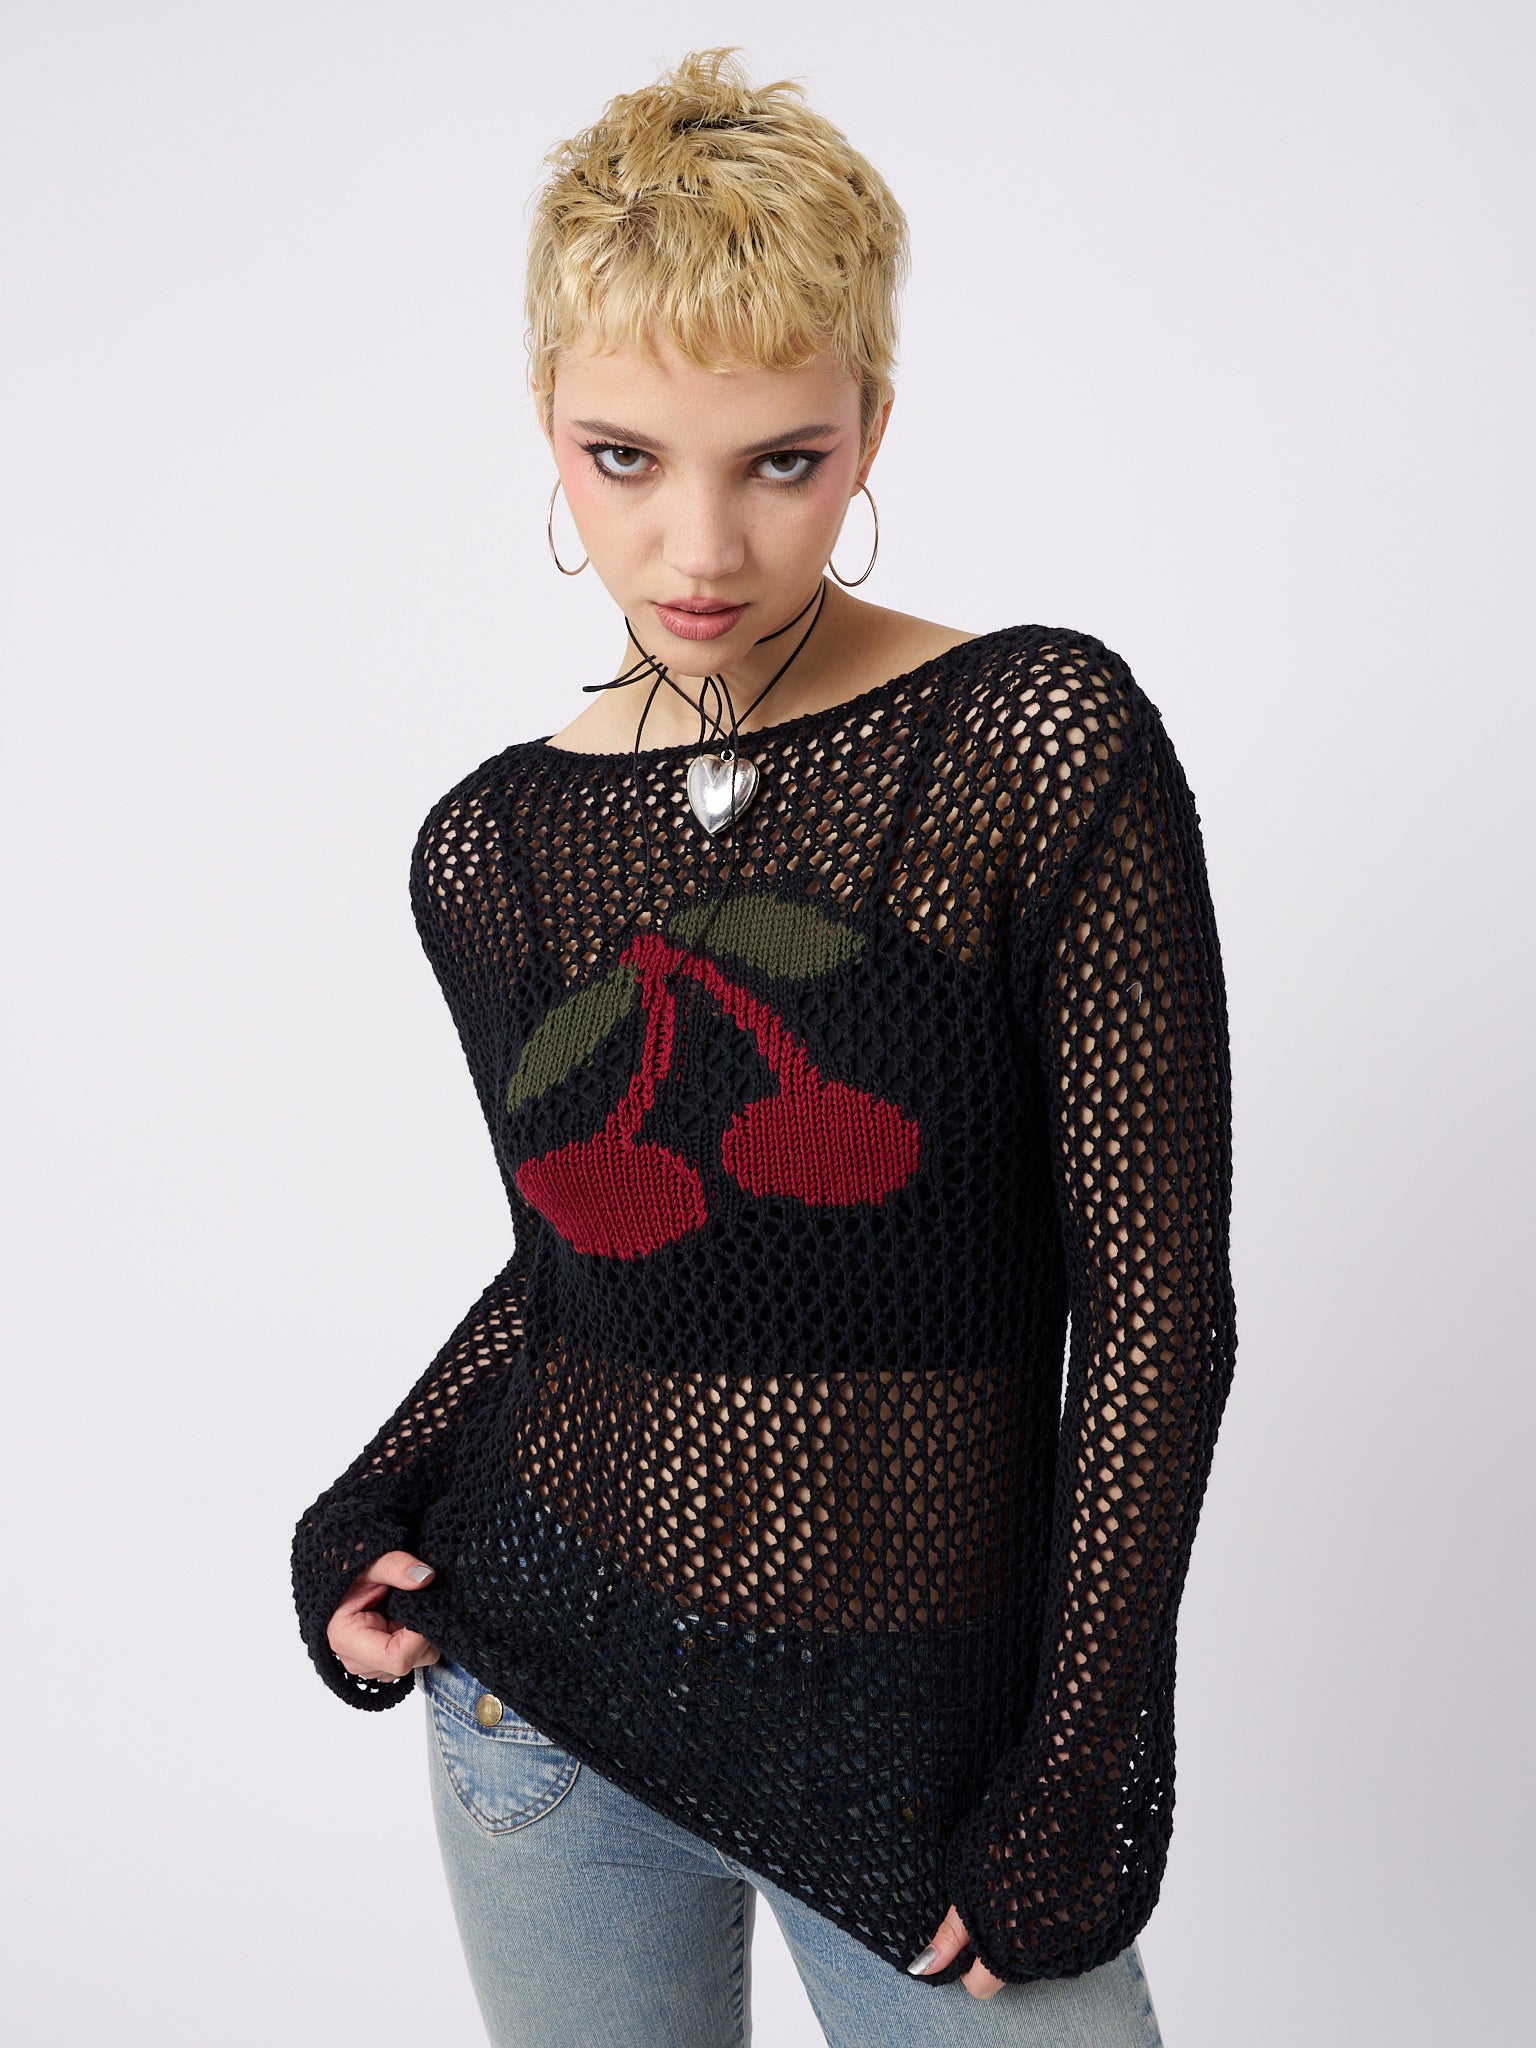 Cerise open knit jumper in black by Minga London. Versatile and stylish for a comfortable look.